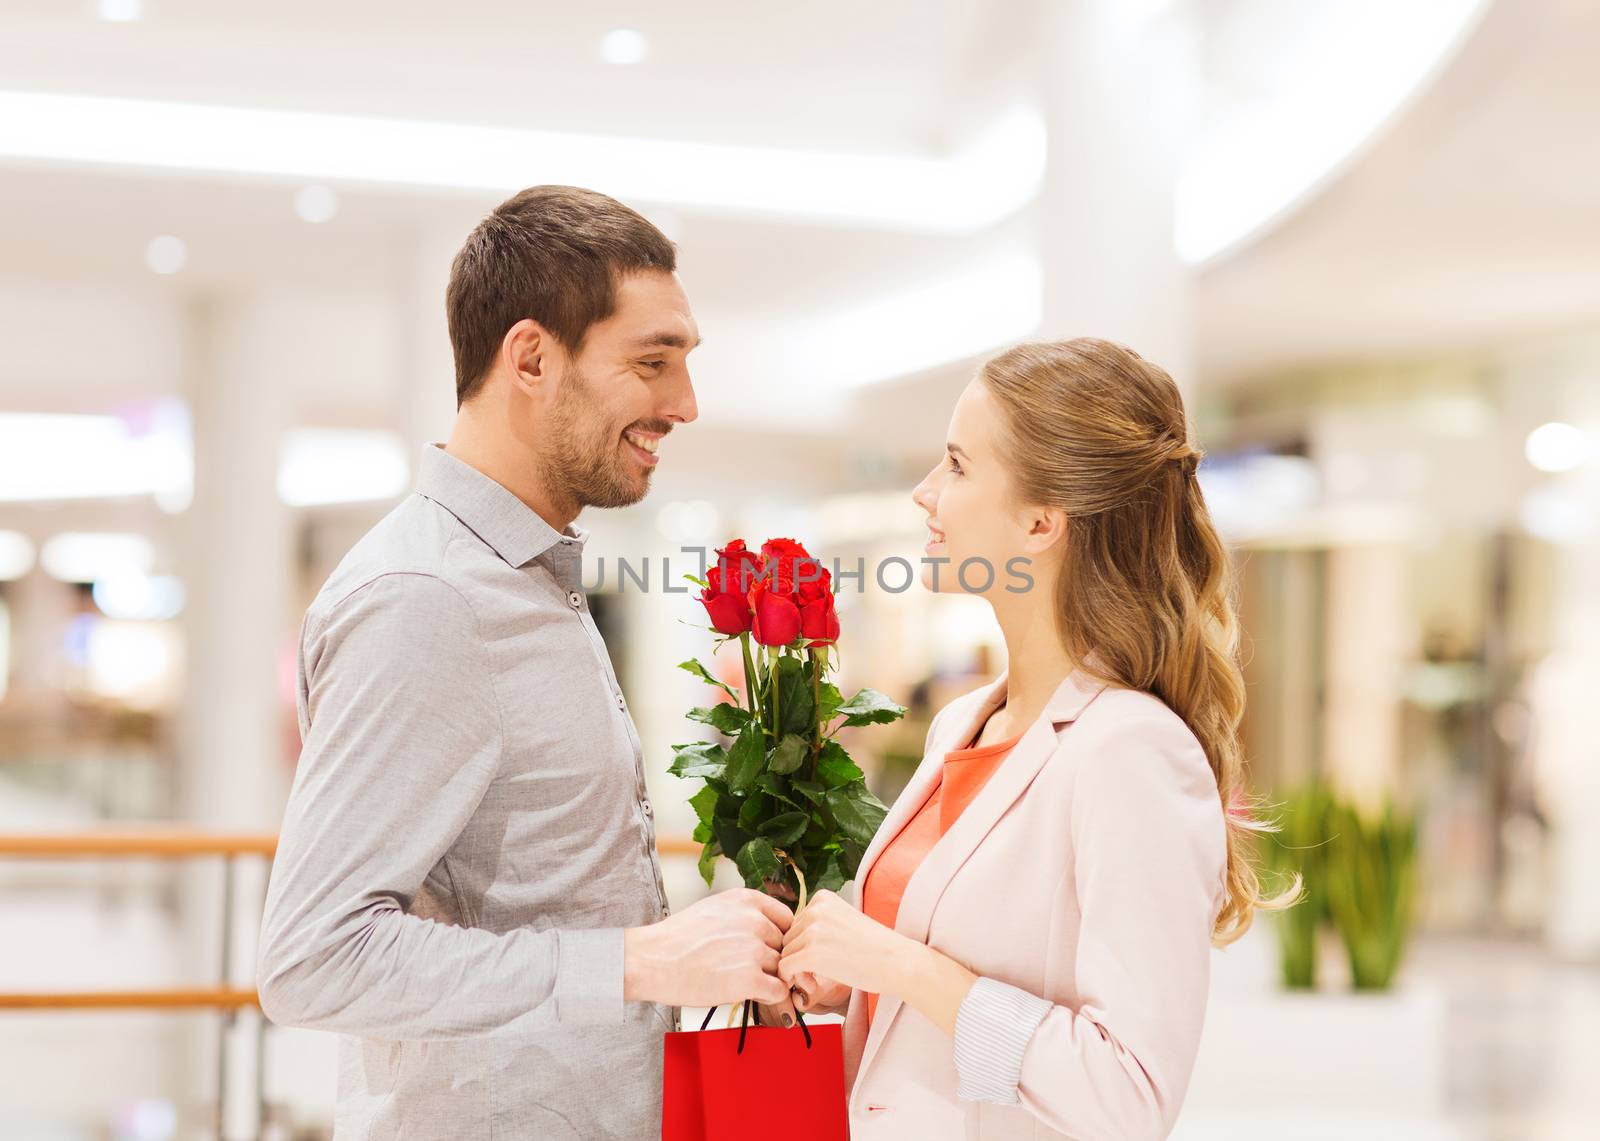 relations, love, romance and people concept - happy young couple with flowers talking in mall